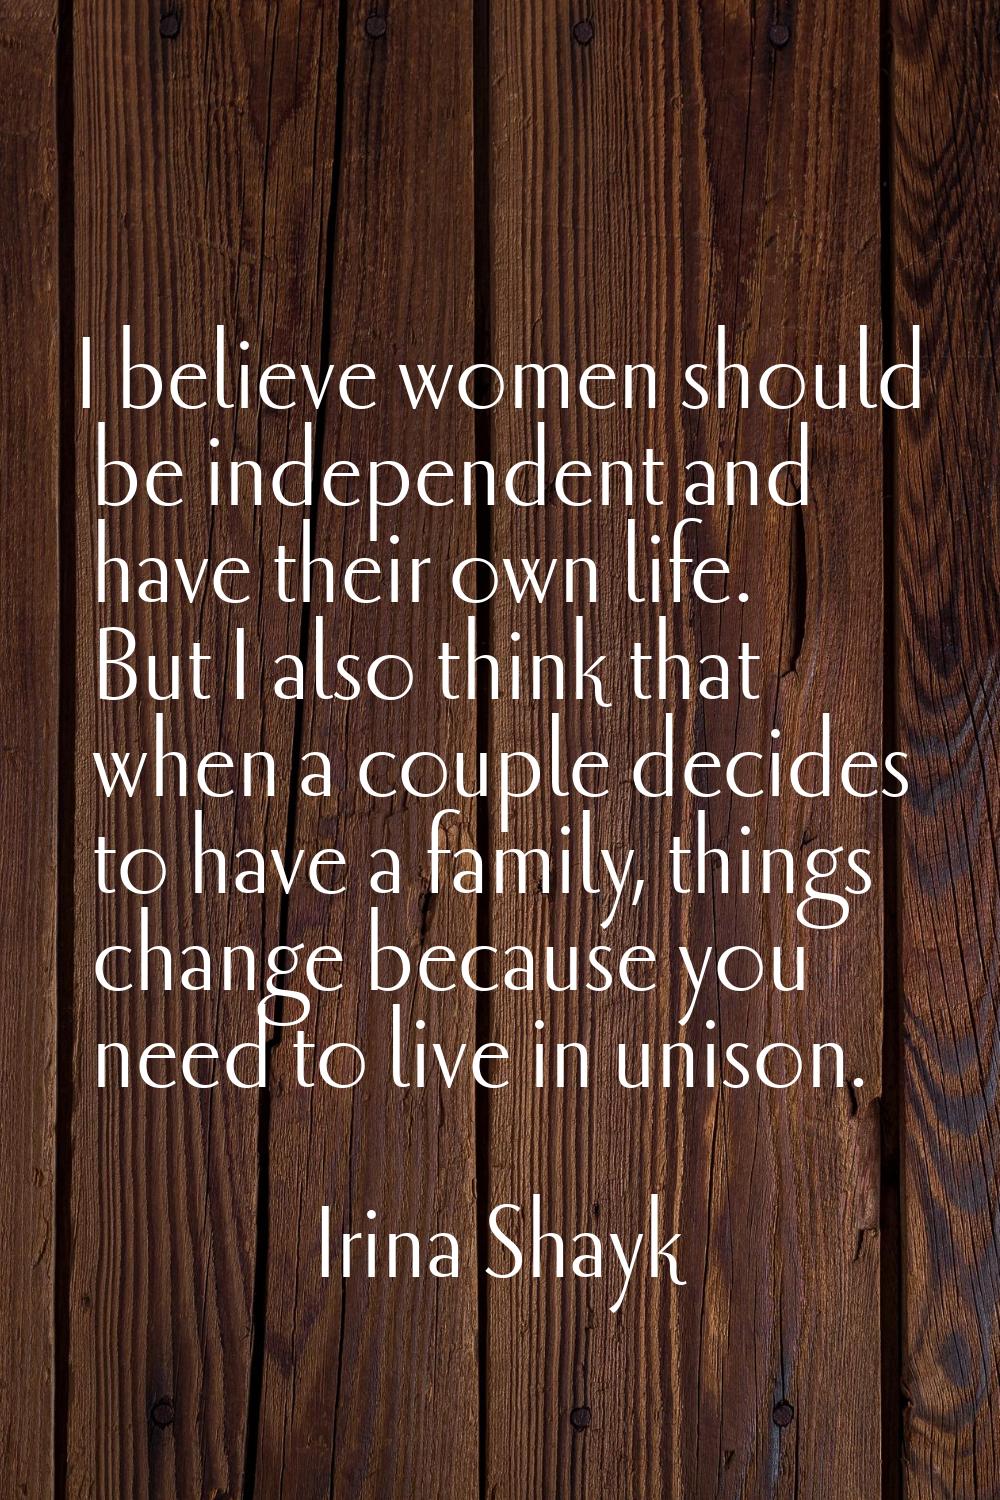 I believe women should be independent and have their own life. But I also think that when a couple 